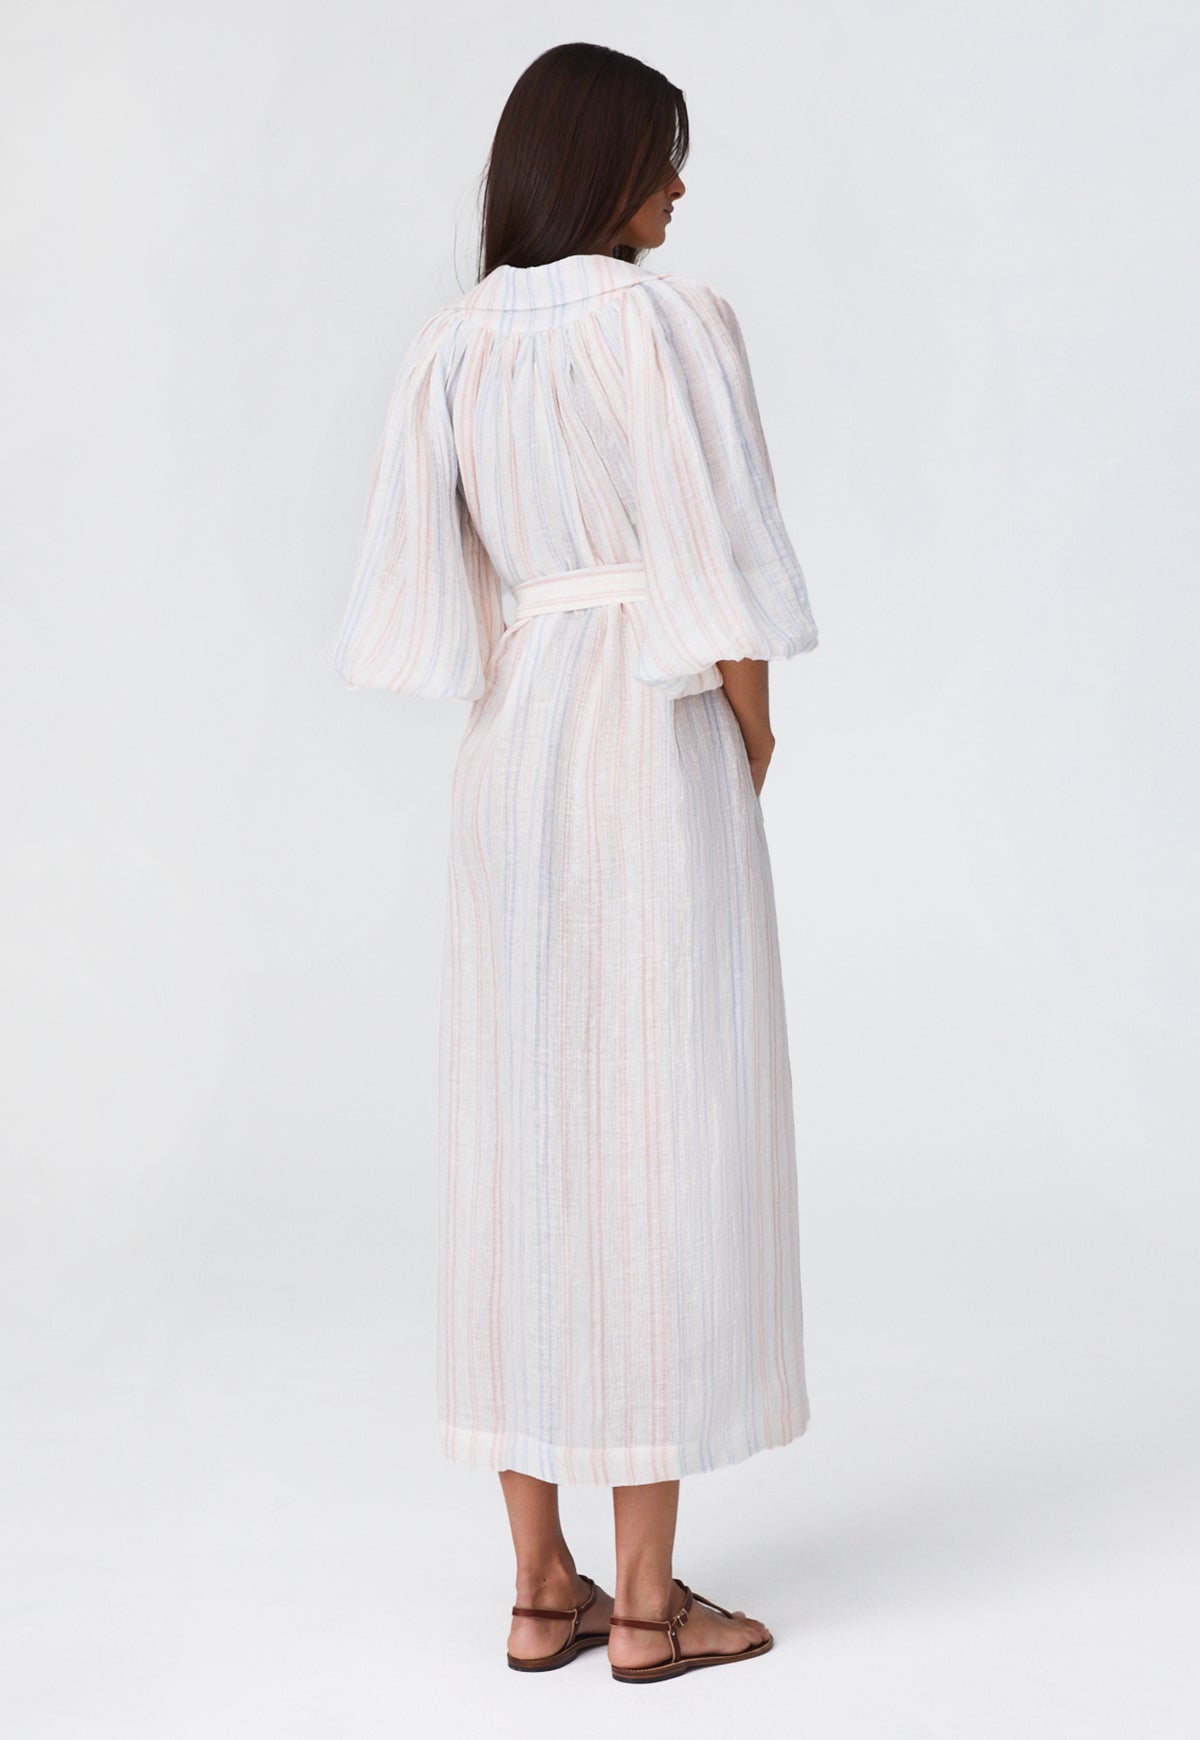 THE POET DRESS  in WHITE & PINK & BLUE STRIPED GAUZE